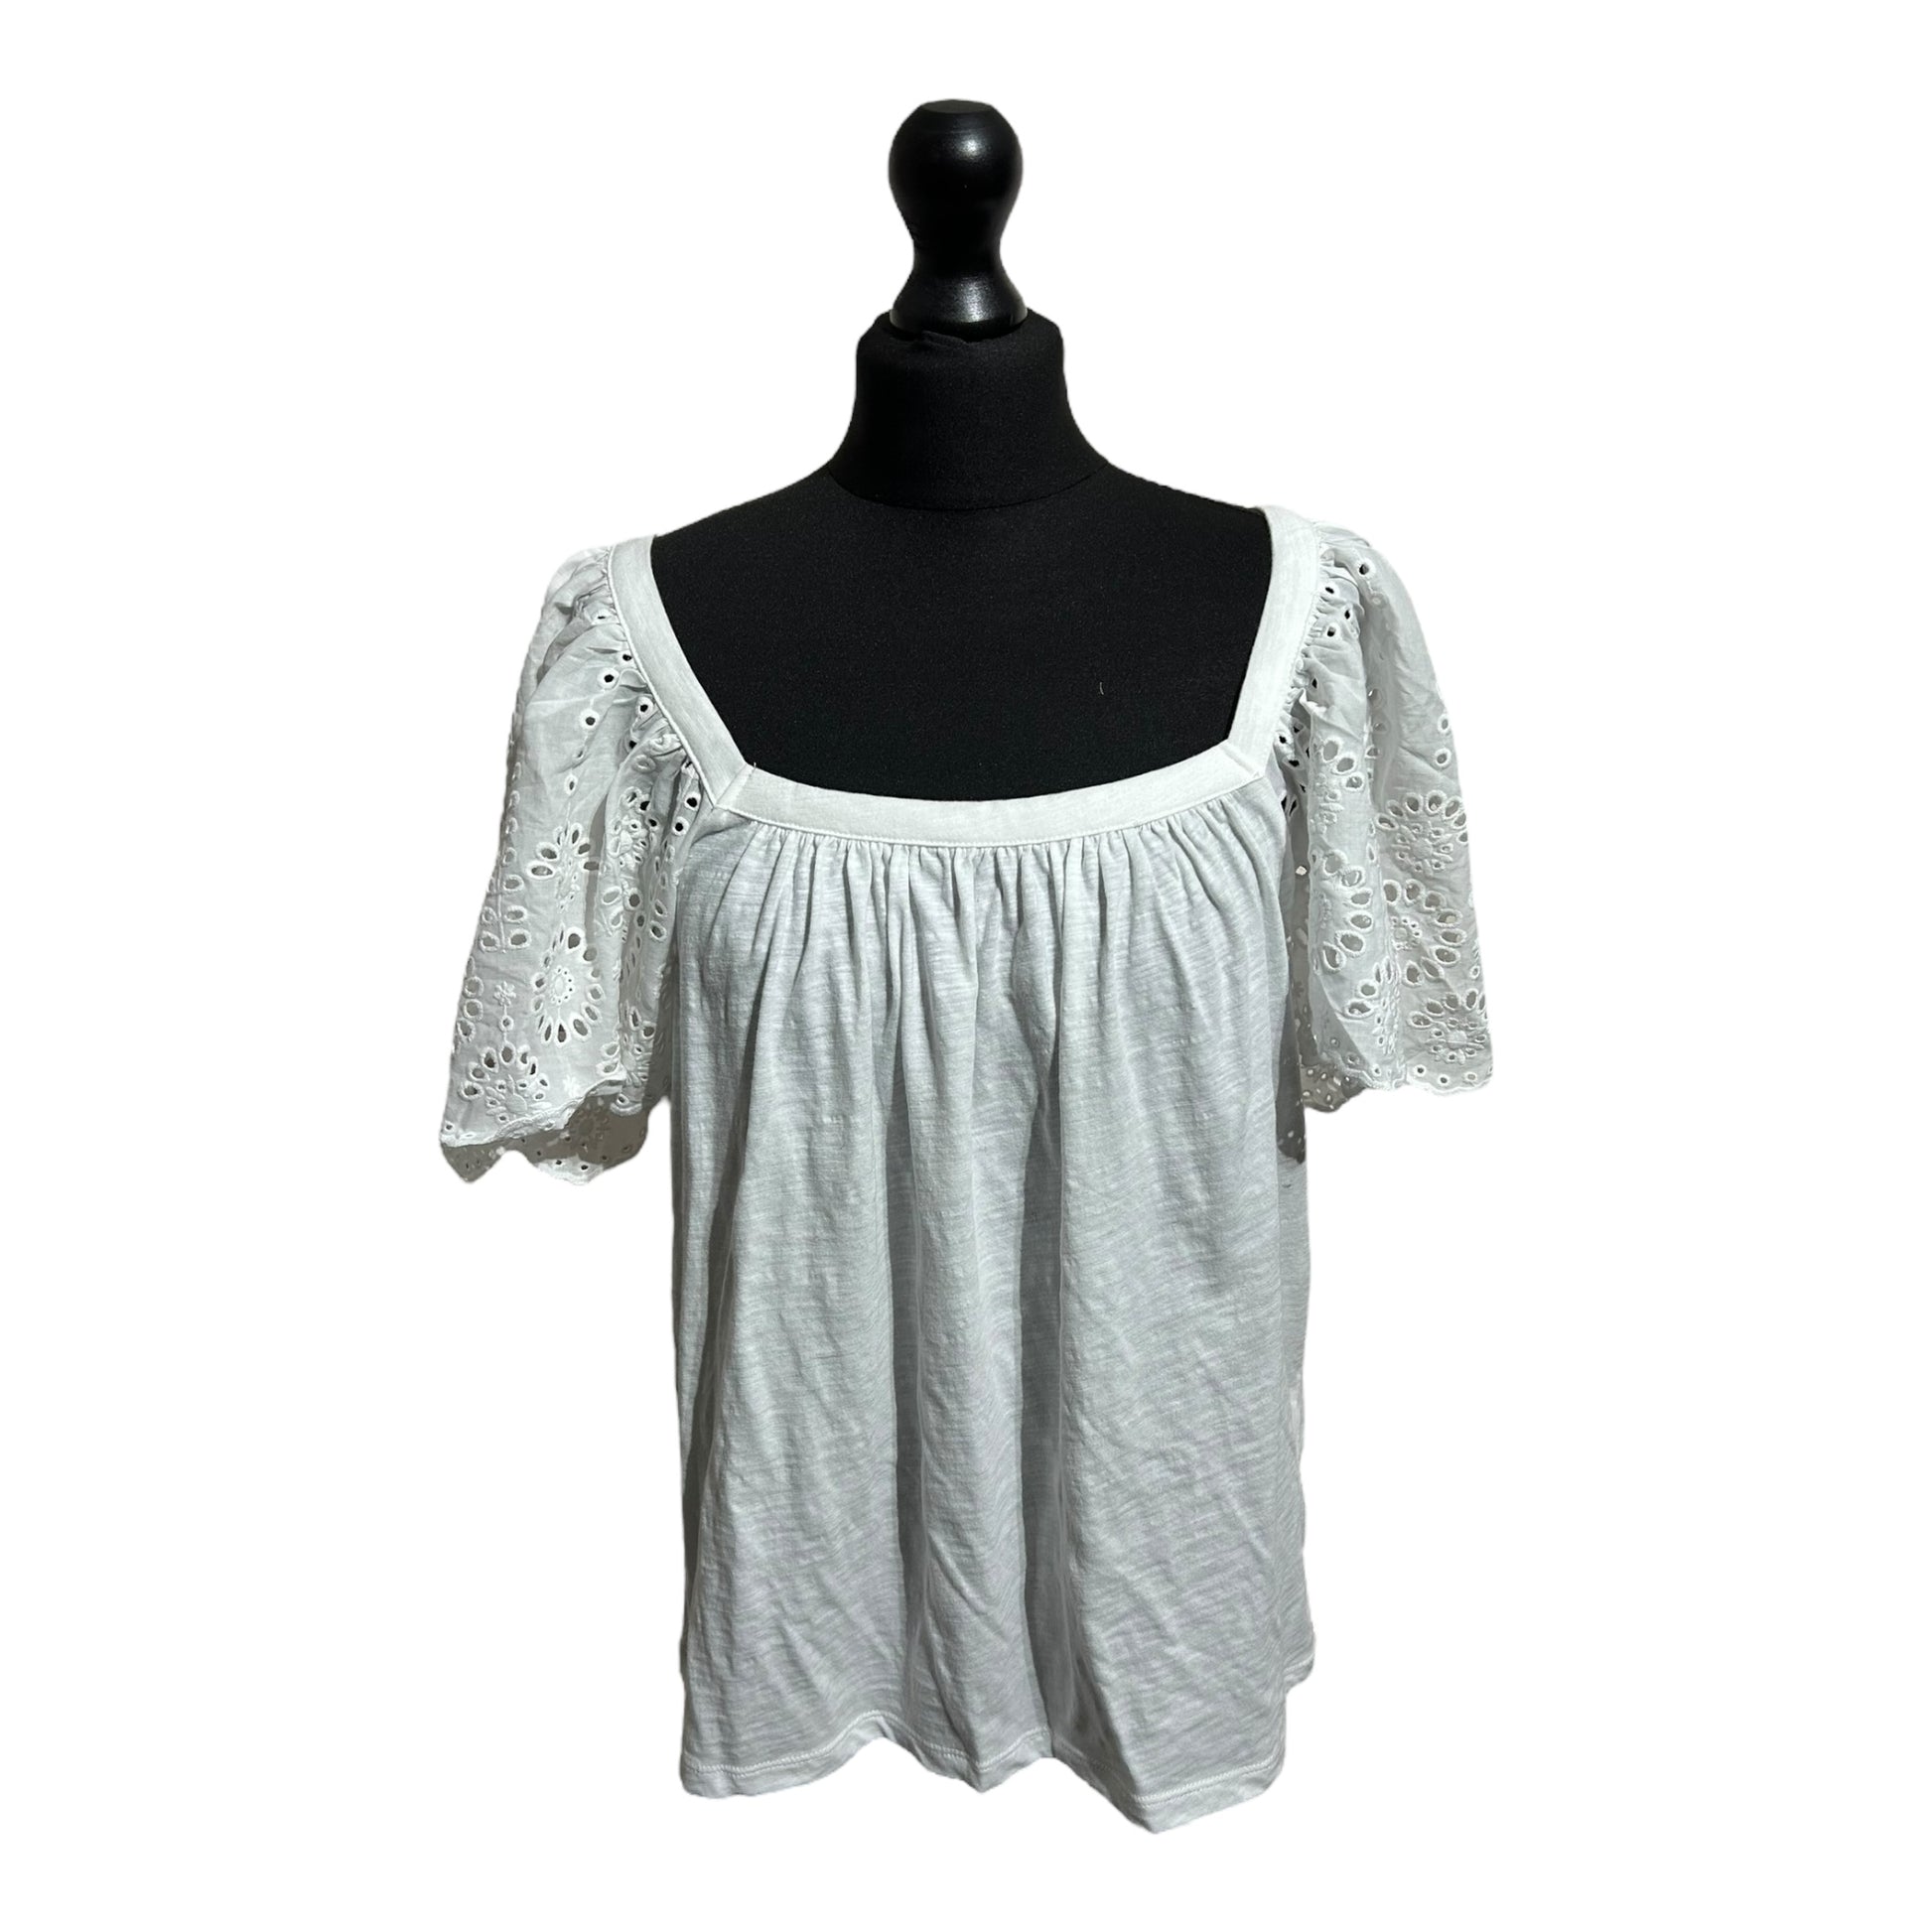 Boden Square Neck Woven Mix Top - Recurring.Life